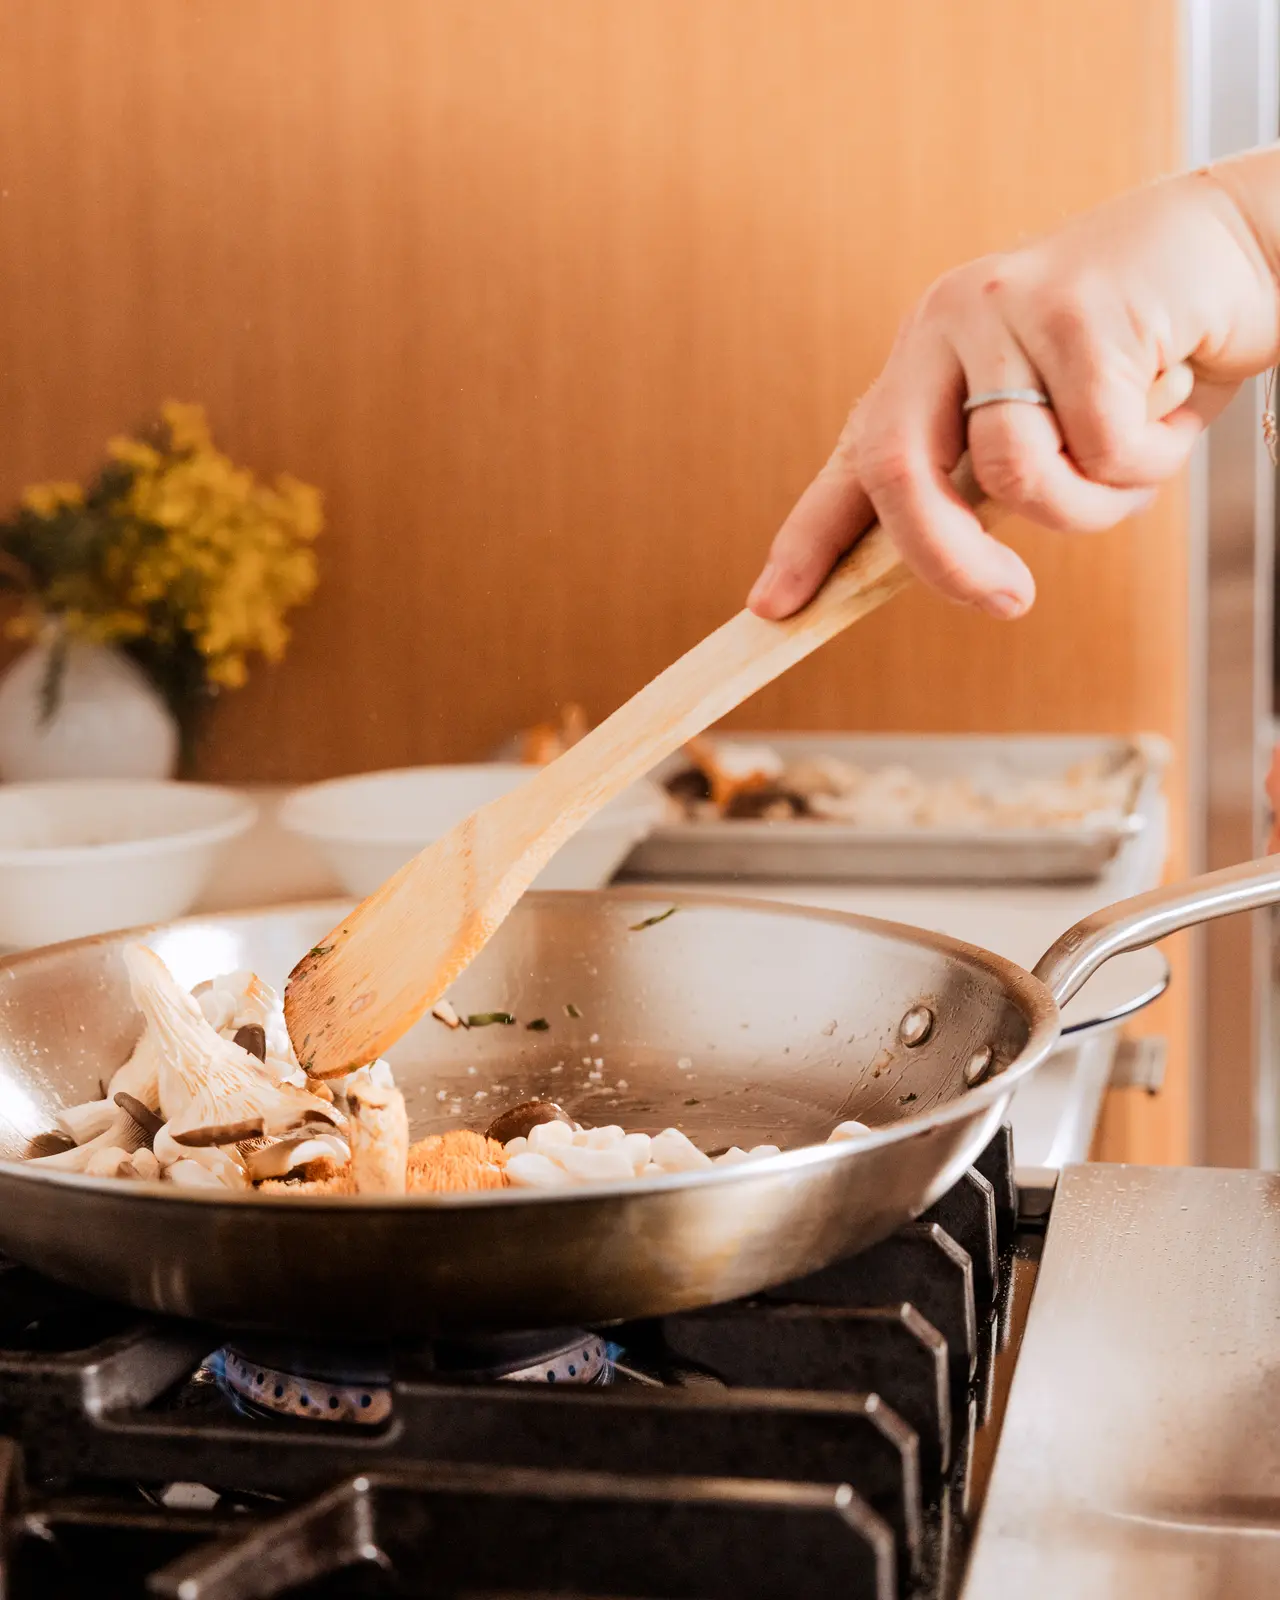 A person's hand is sautéing mushrooms and other ingredients in a frying pan over a stovetop.